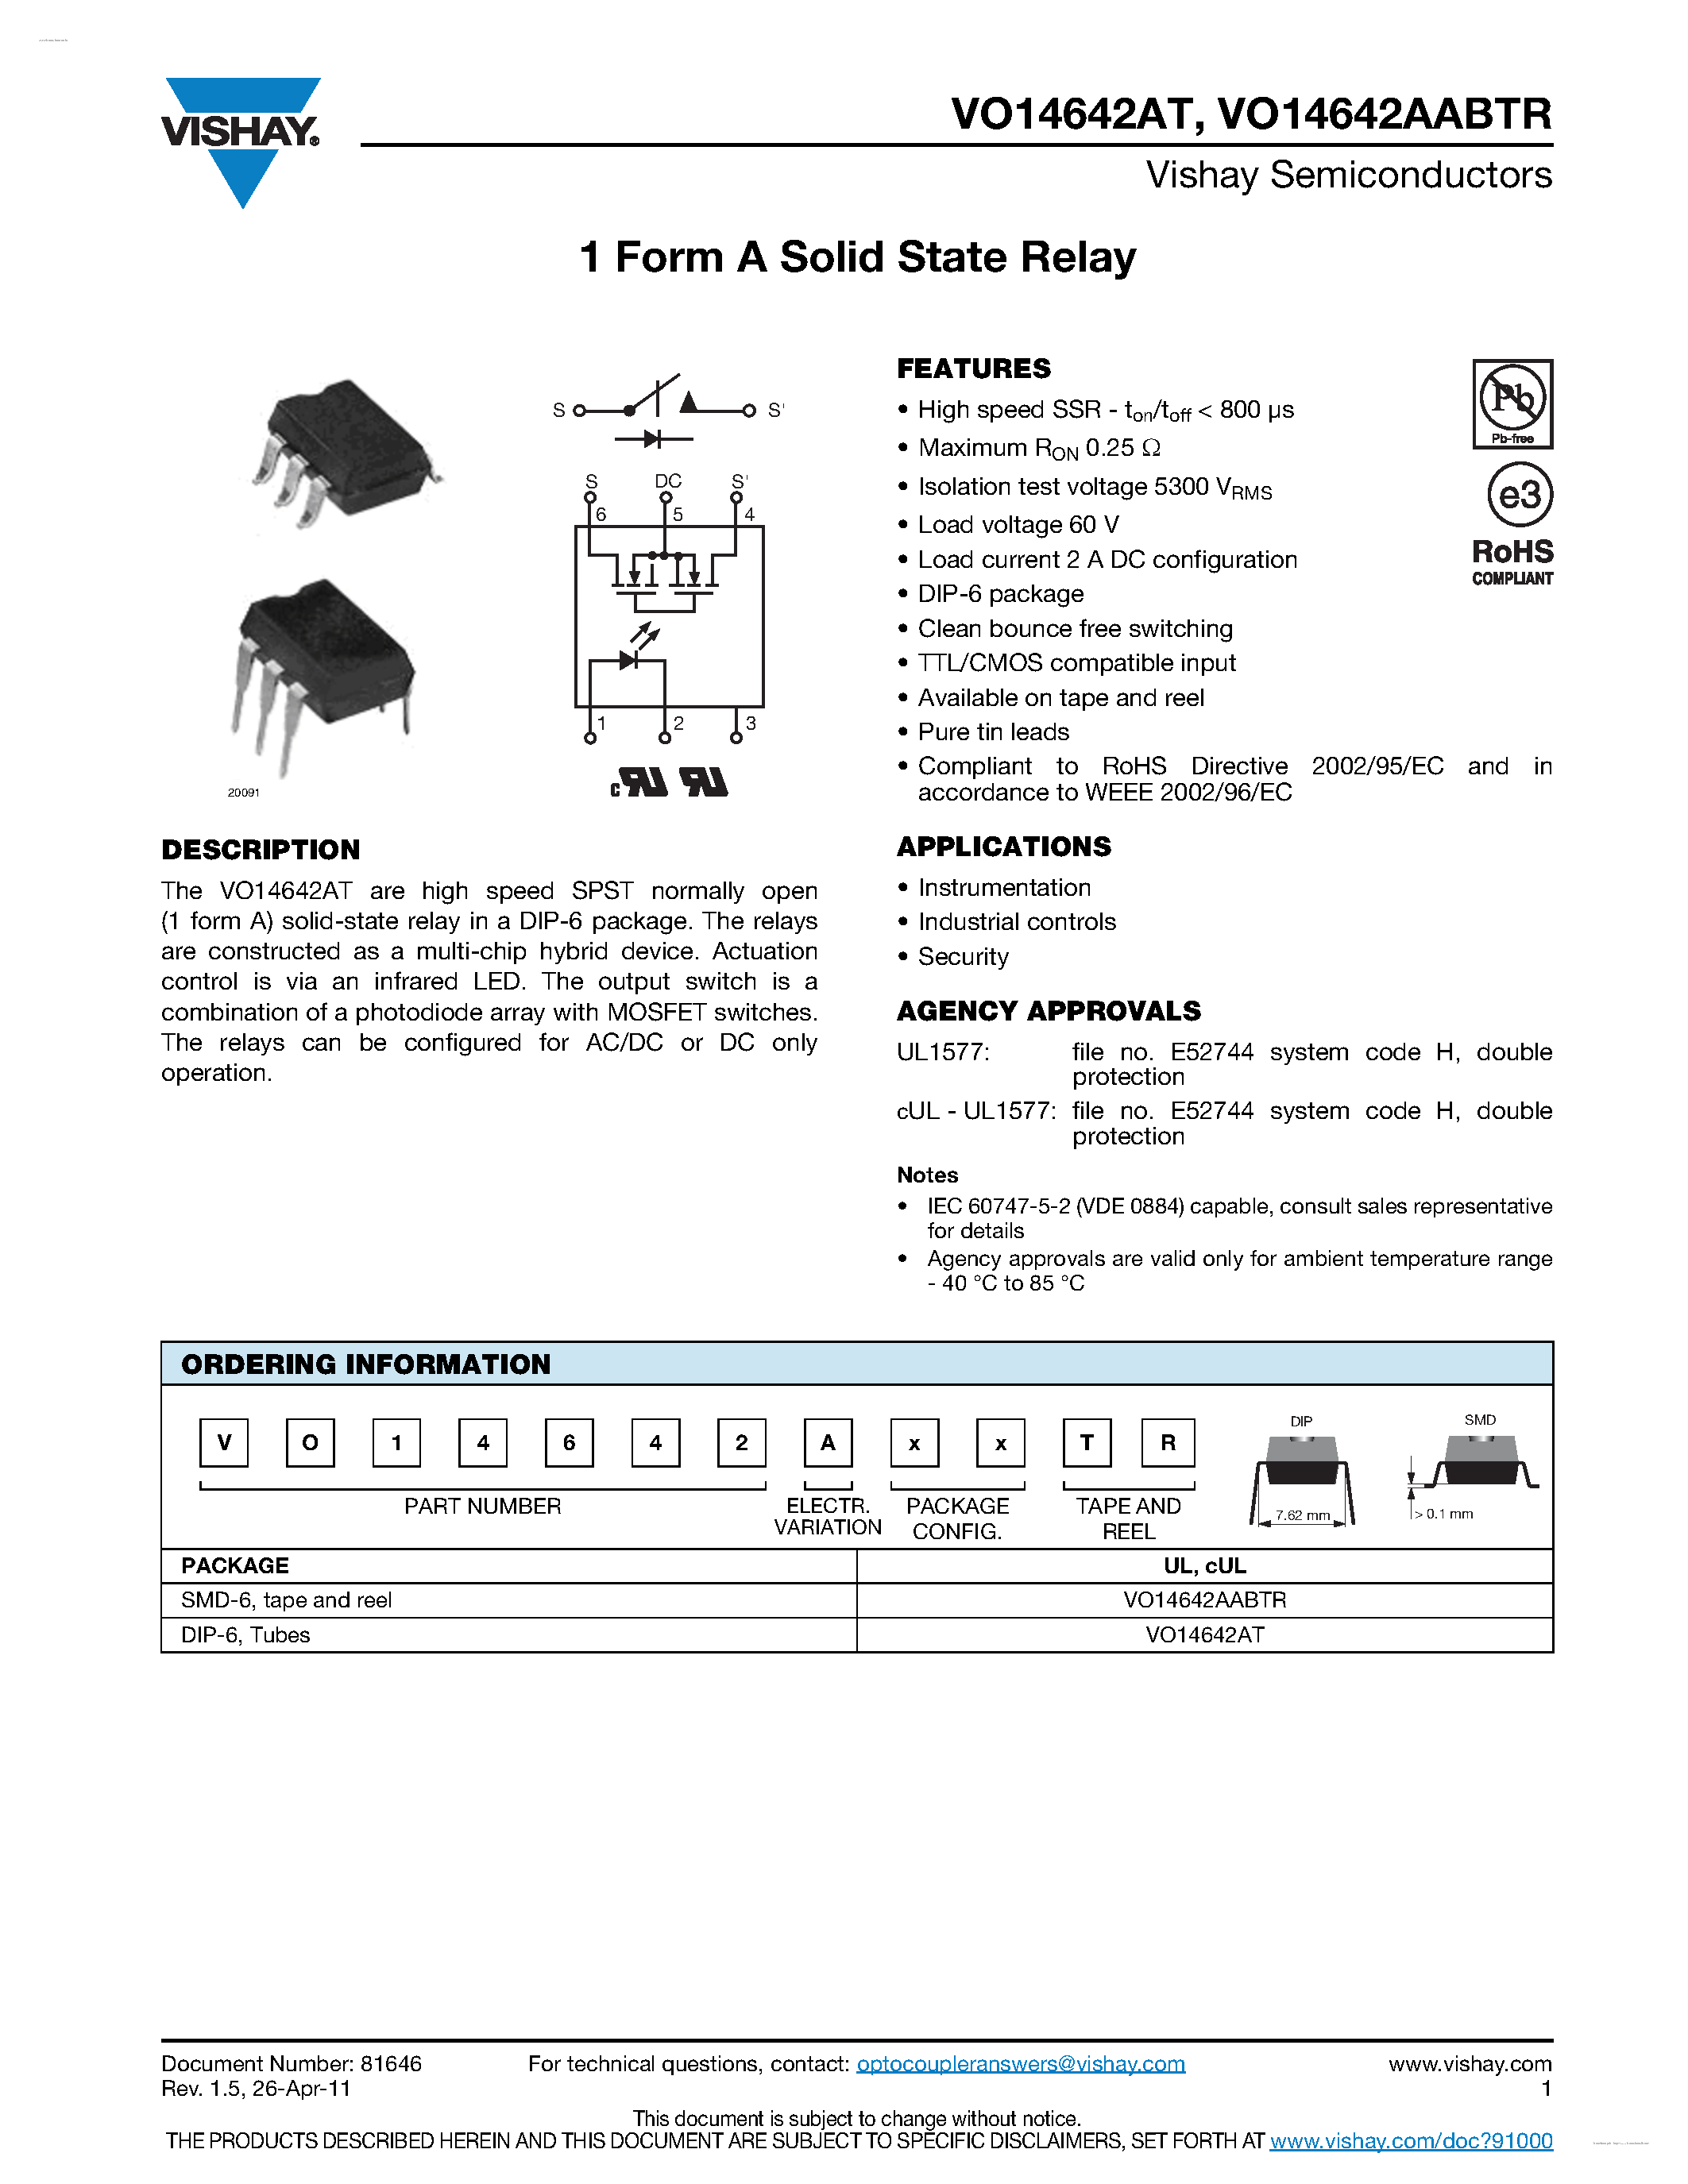 Даташит VO14642AABTR - 1 Form A Solid State Relay страница 1